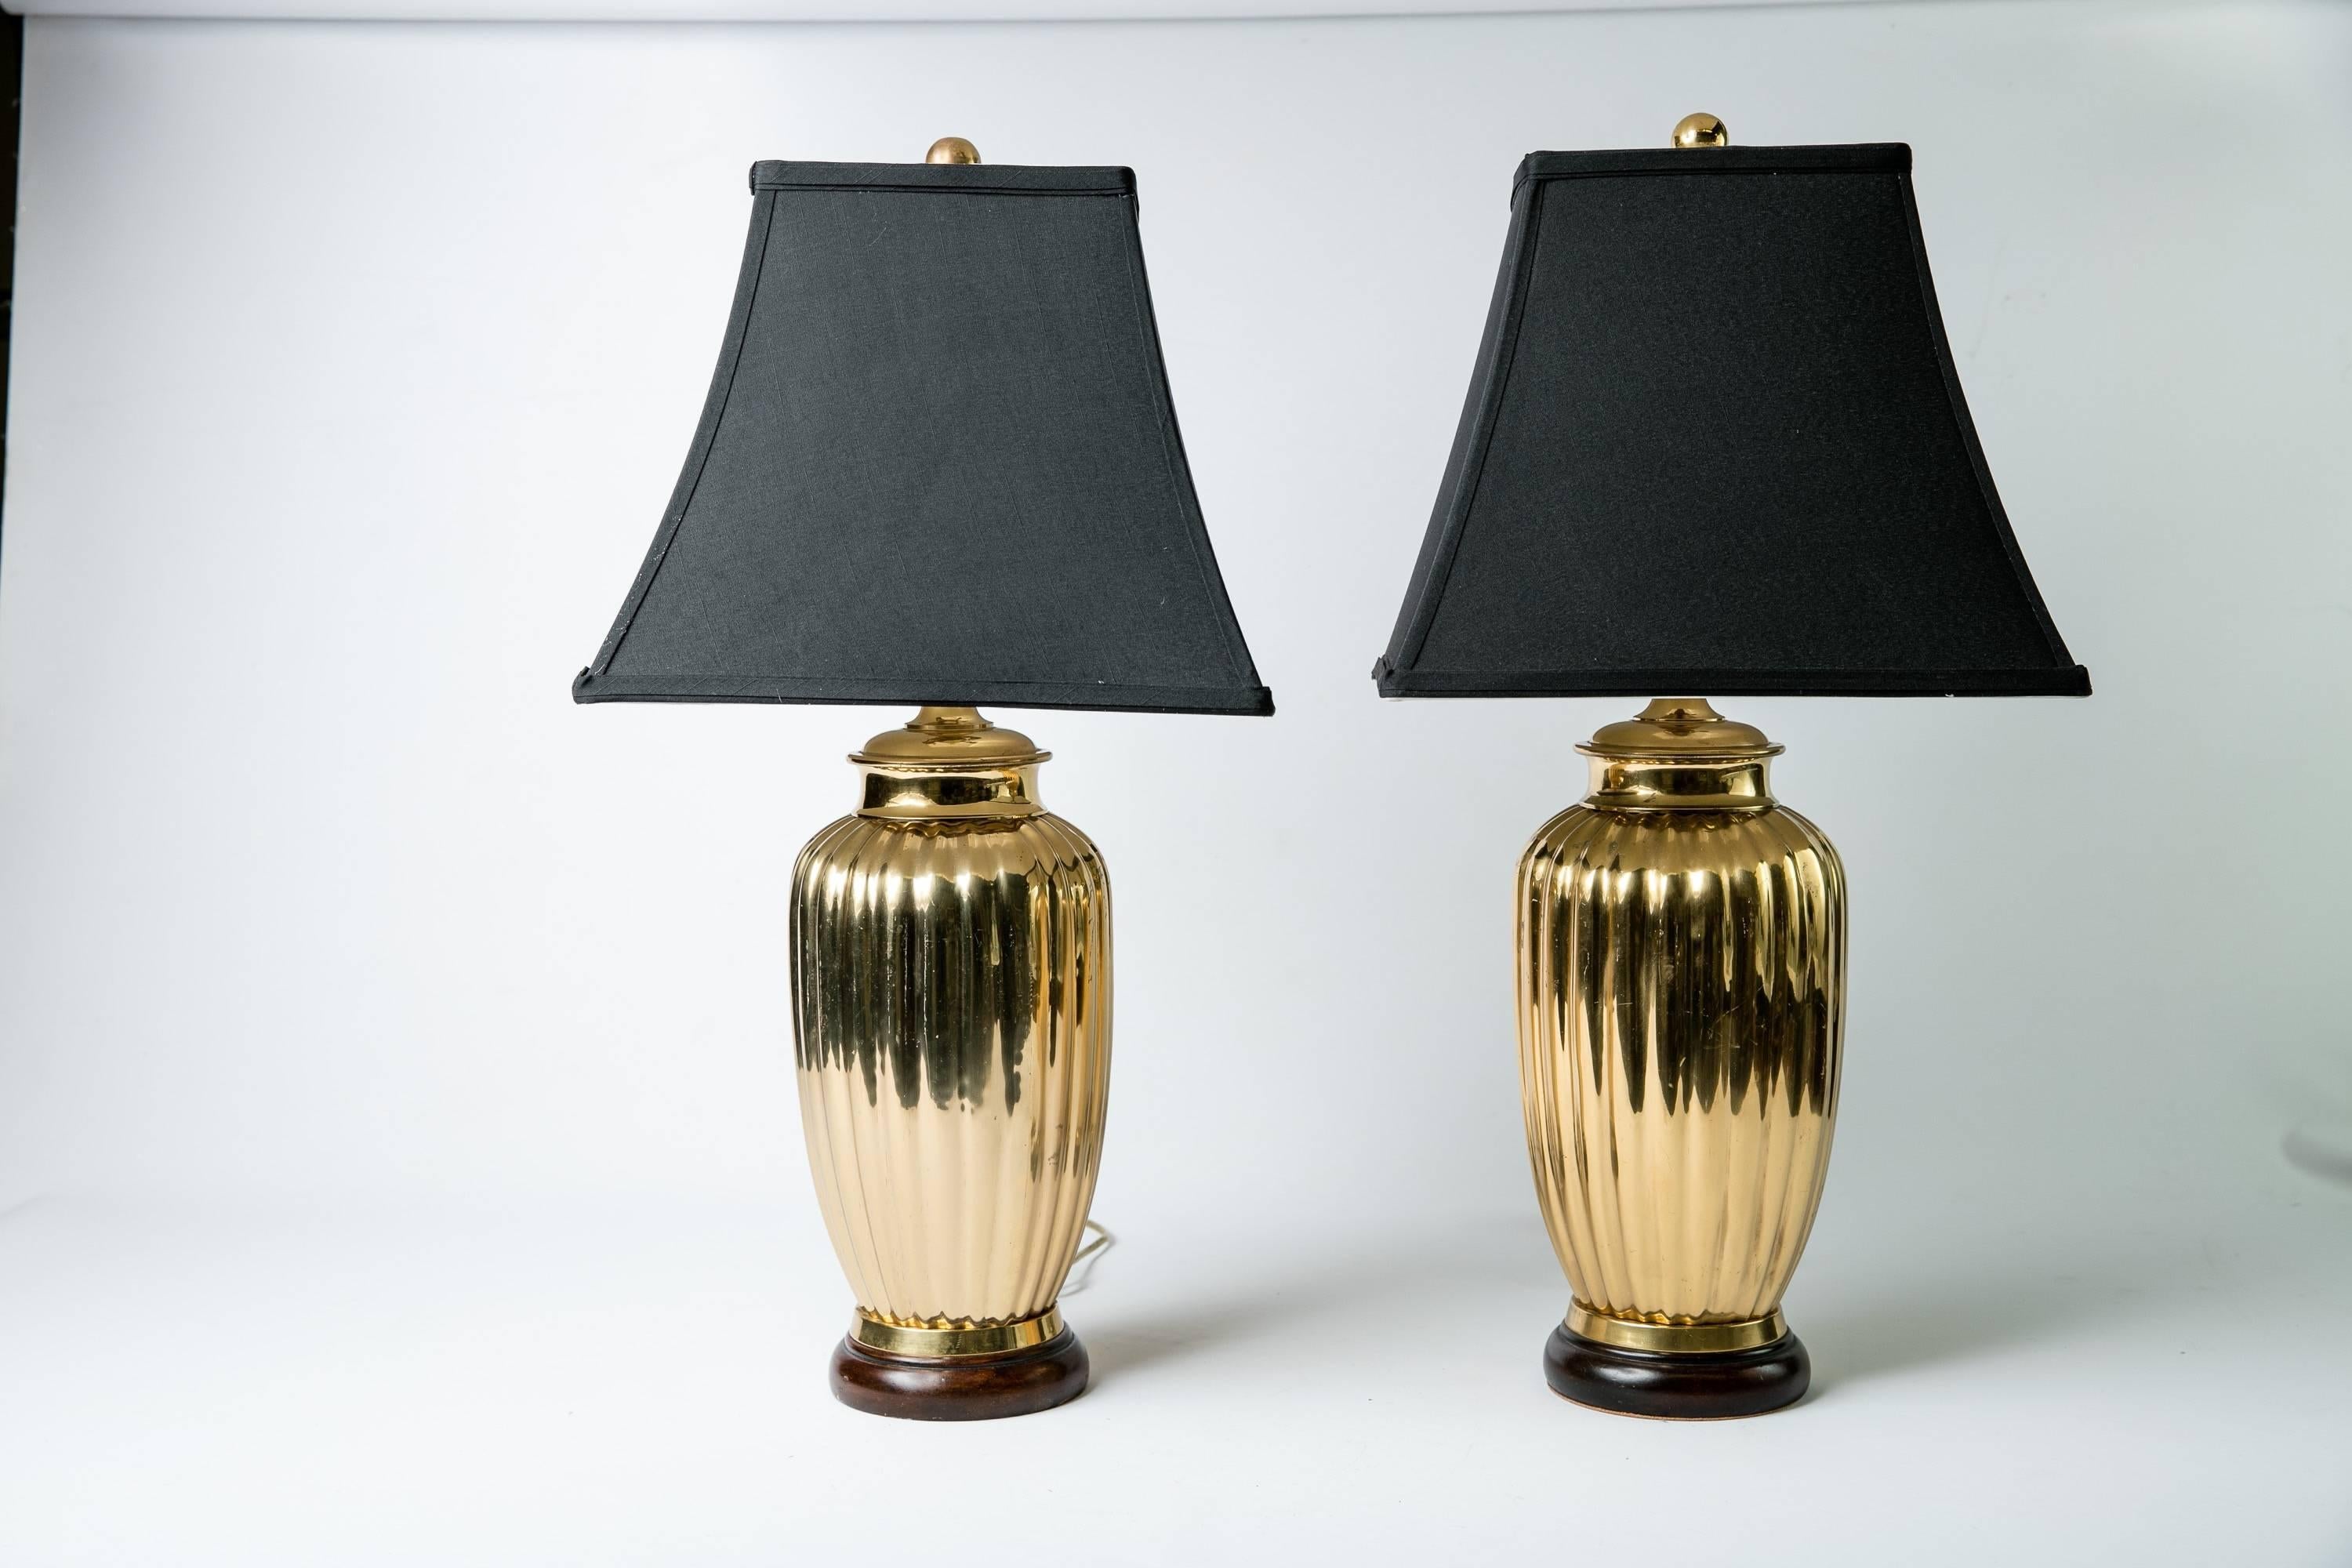 Pair of Deco-style heavy brass torpedo shaped table lamps with fluting and wood bases. The lamps have square corner bell-shaped black faux-silk shades. Newly wired and working; each lamp takes a 60W-max bulb. Measures: Shades, 7" diameter top x